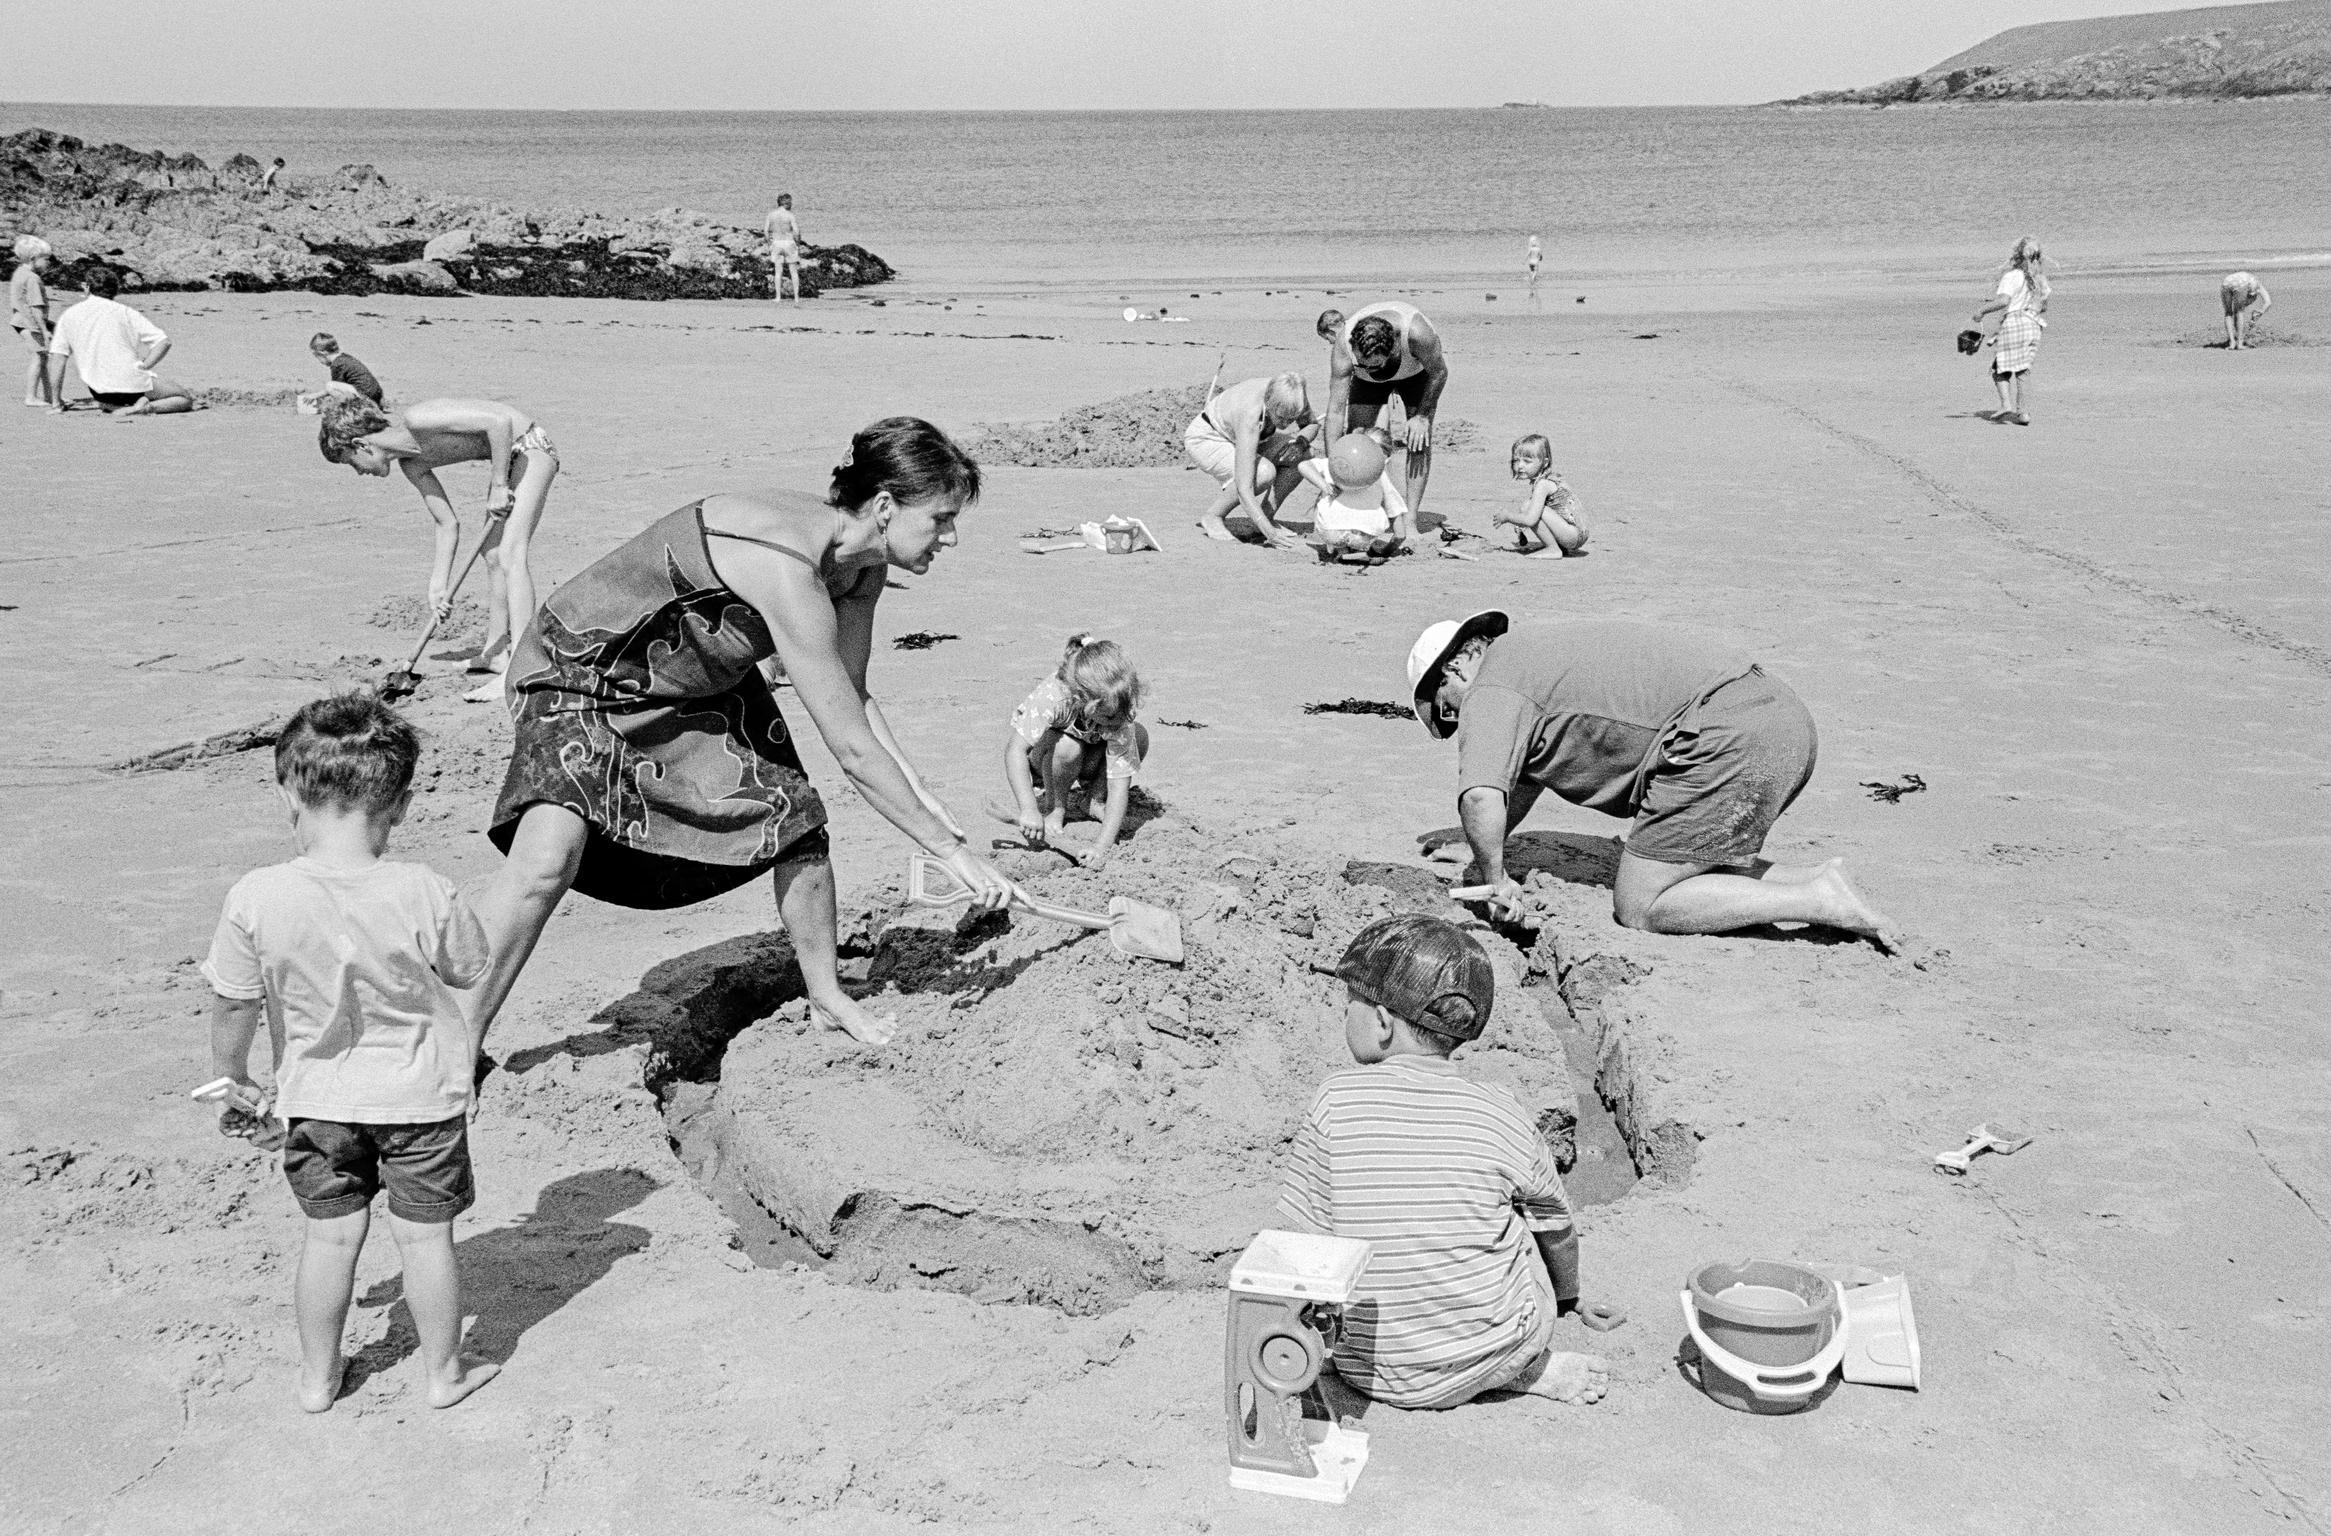 Sandcastle making on the beach. Porthor, Wales